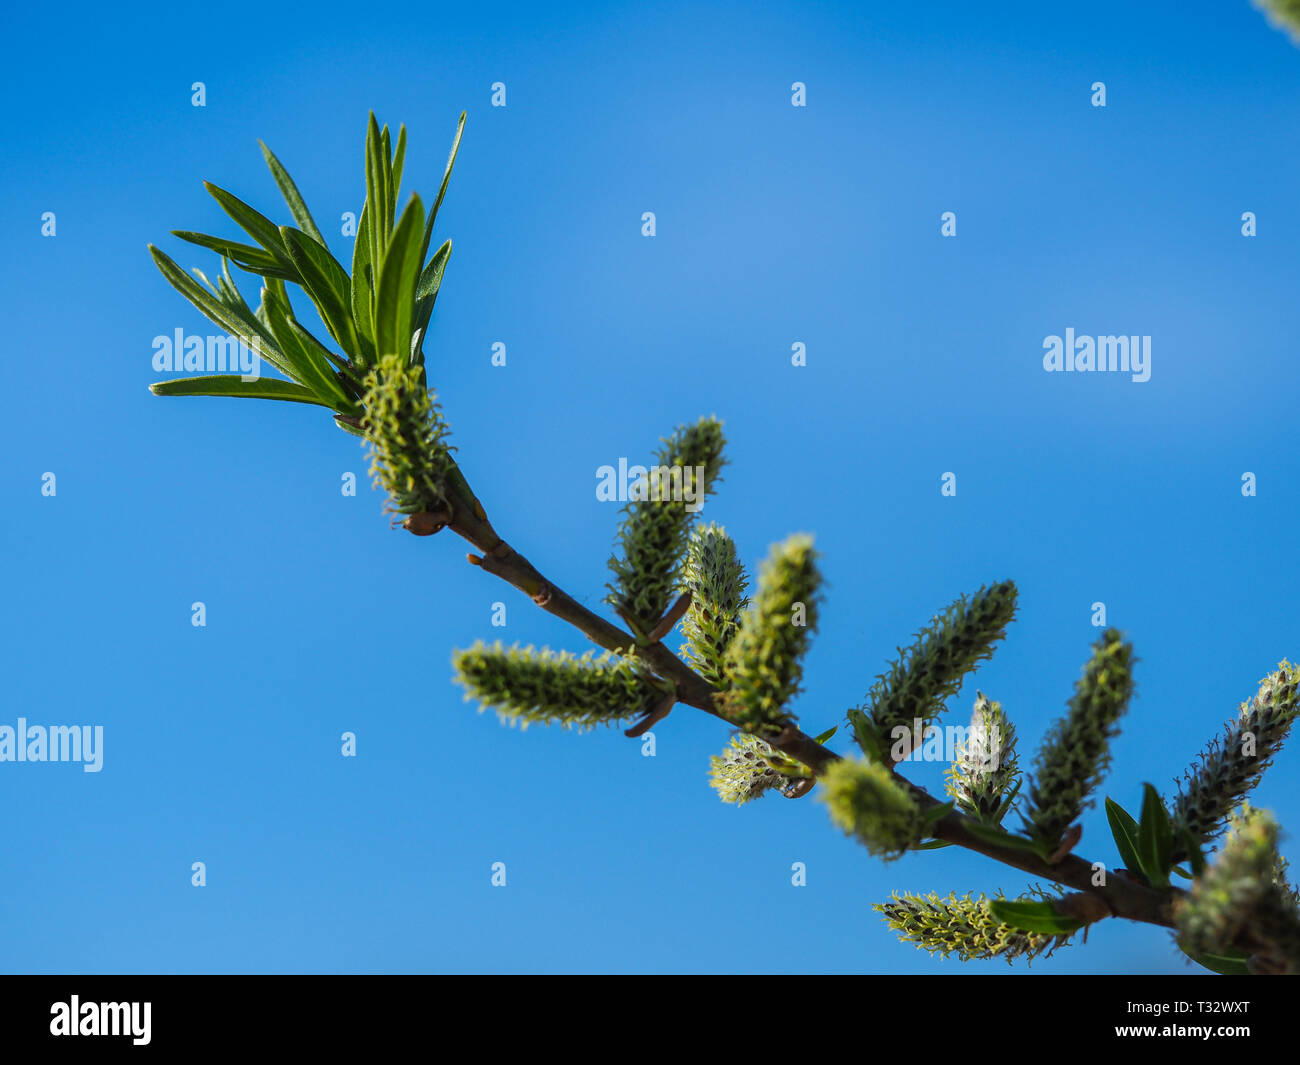 New spring leaves and catkins on a willow tree branch with a clear blue sky background Stock Photo